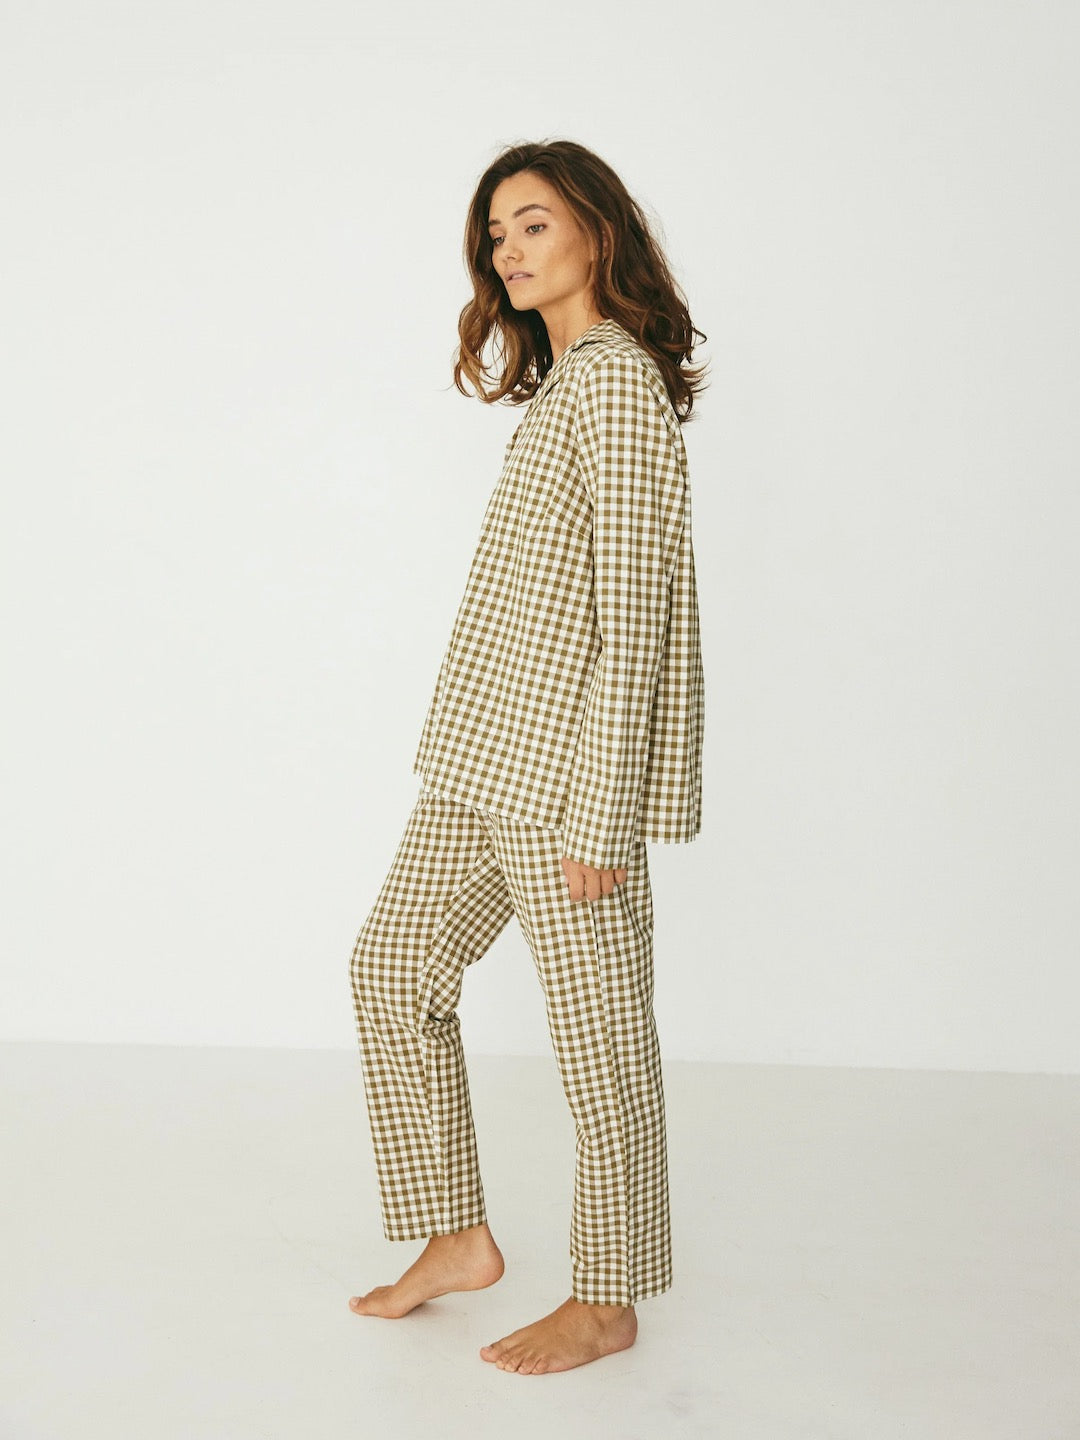 The model is wearing a Classic Set – Olive Gingham pajama set by general sleep.